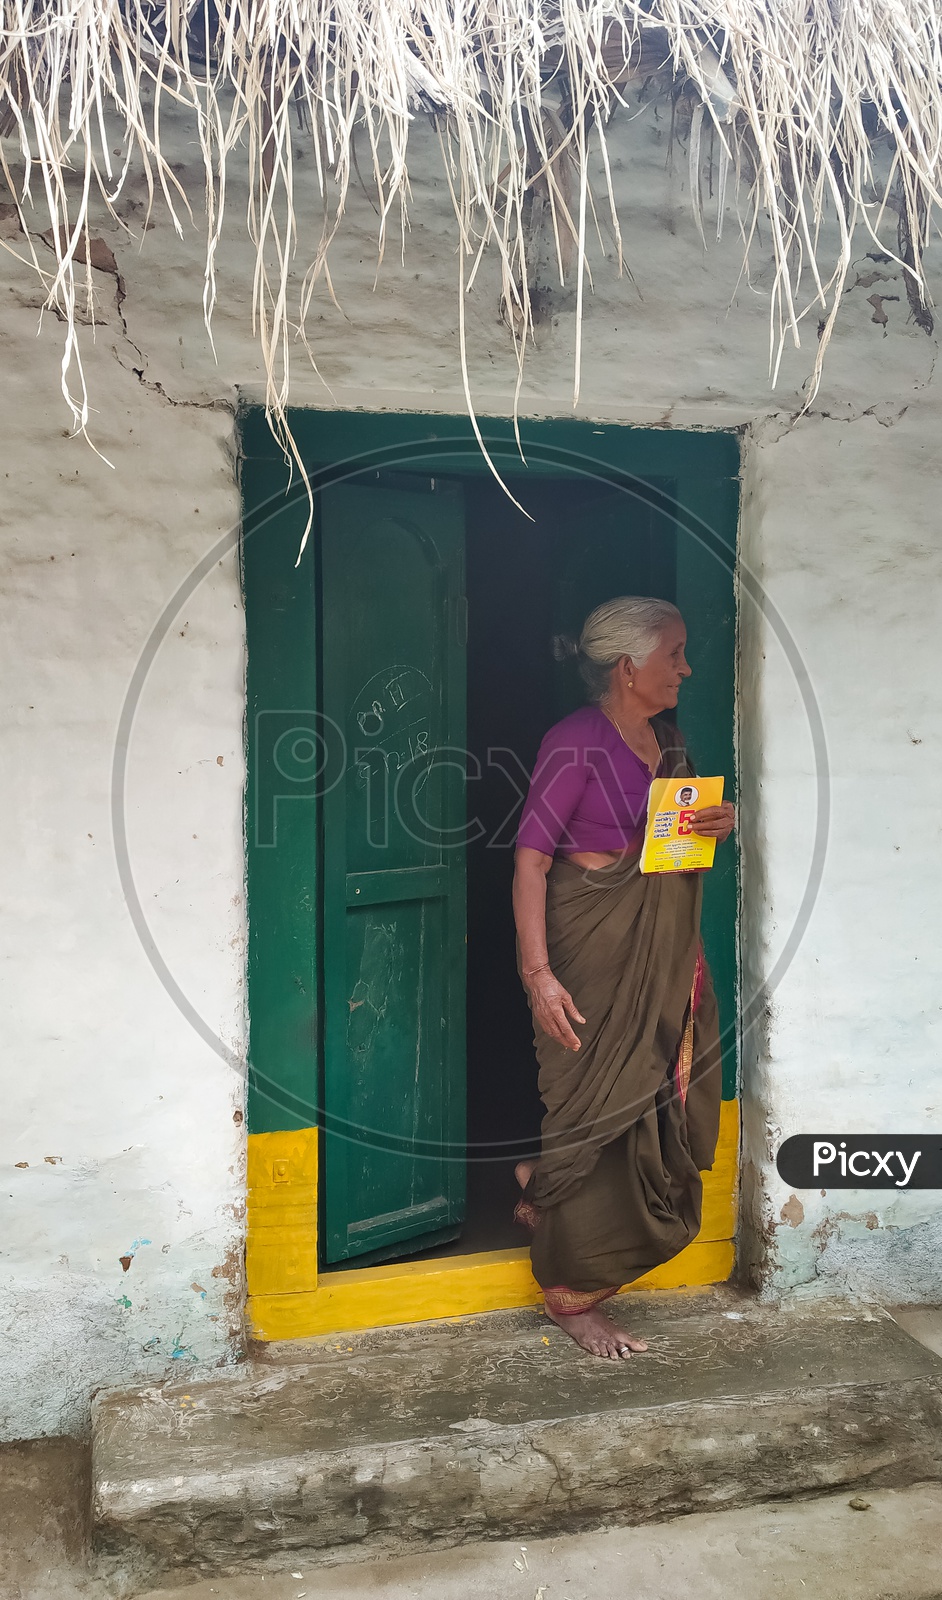 An Old Lady With Her Pension Card in Her Hand  Waiting at Door Step in Andhra Pradesh